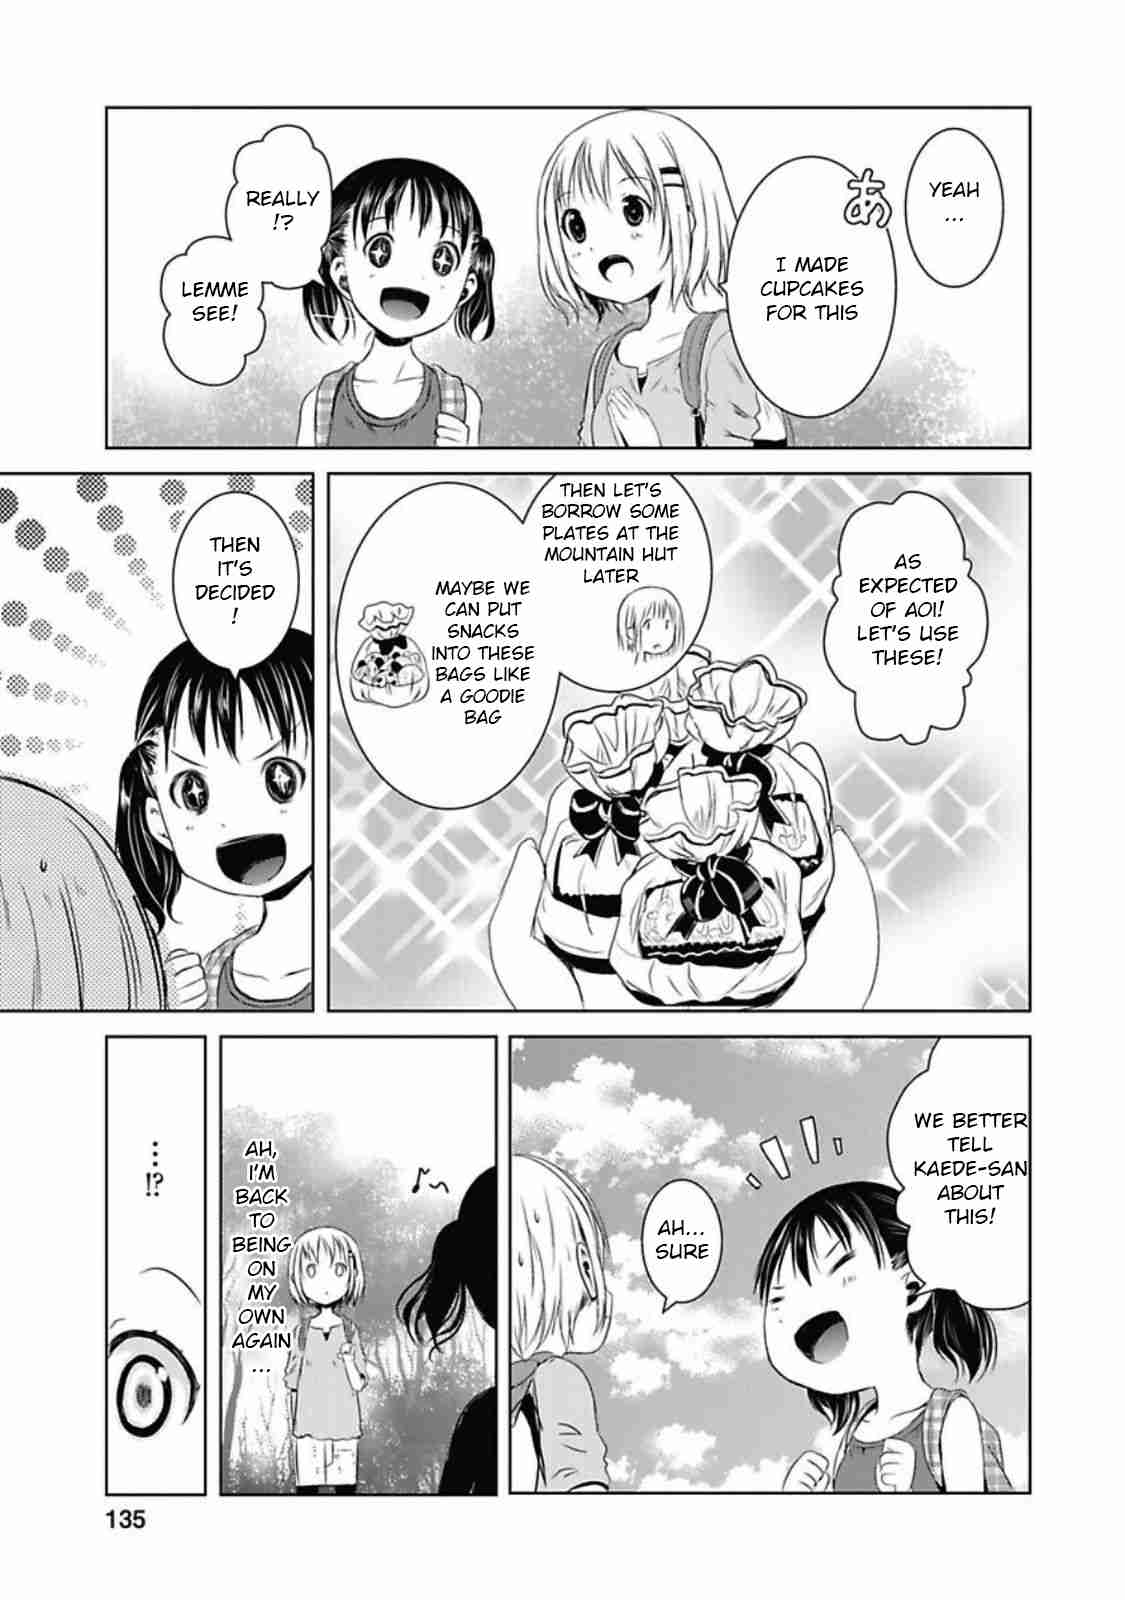 Yama No Susume Vol. 4 Ch. 31 Premonition of an Encounter